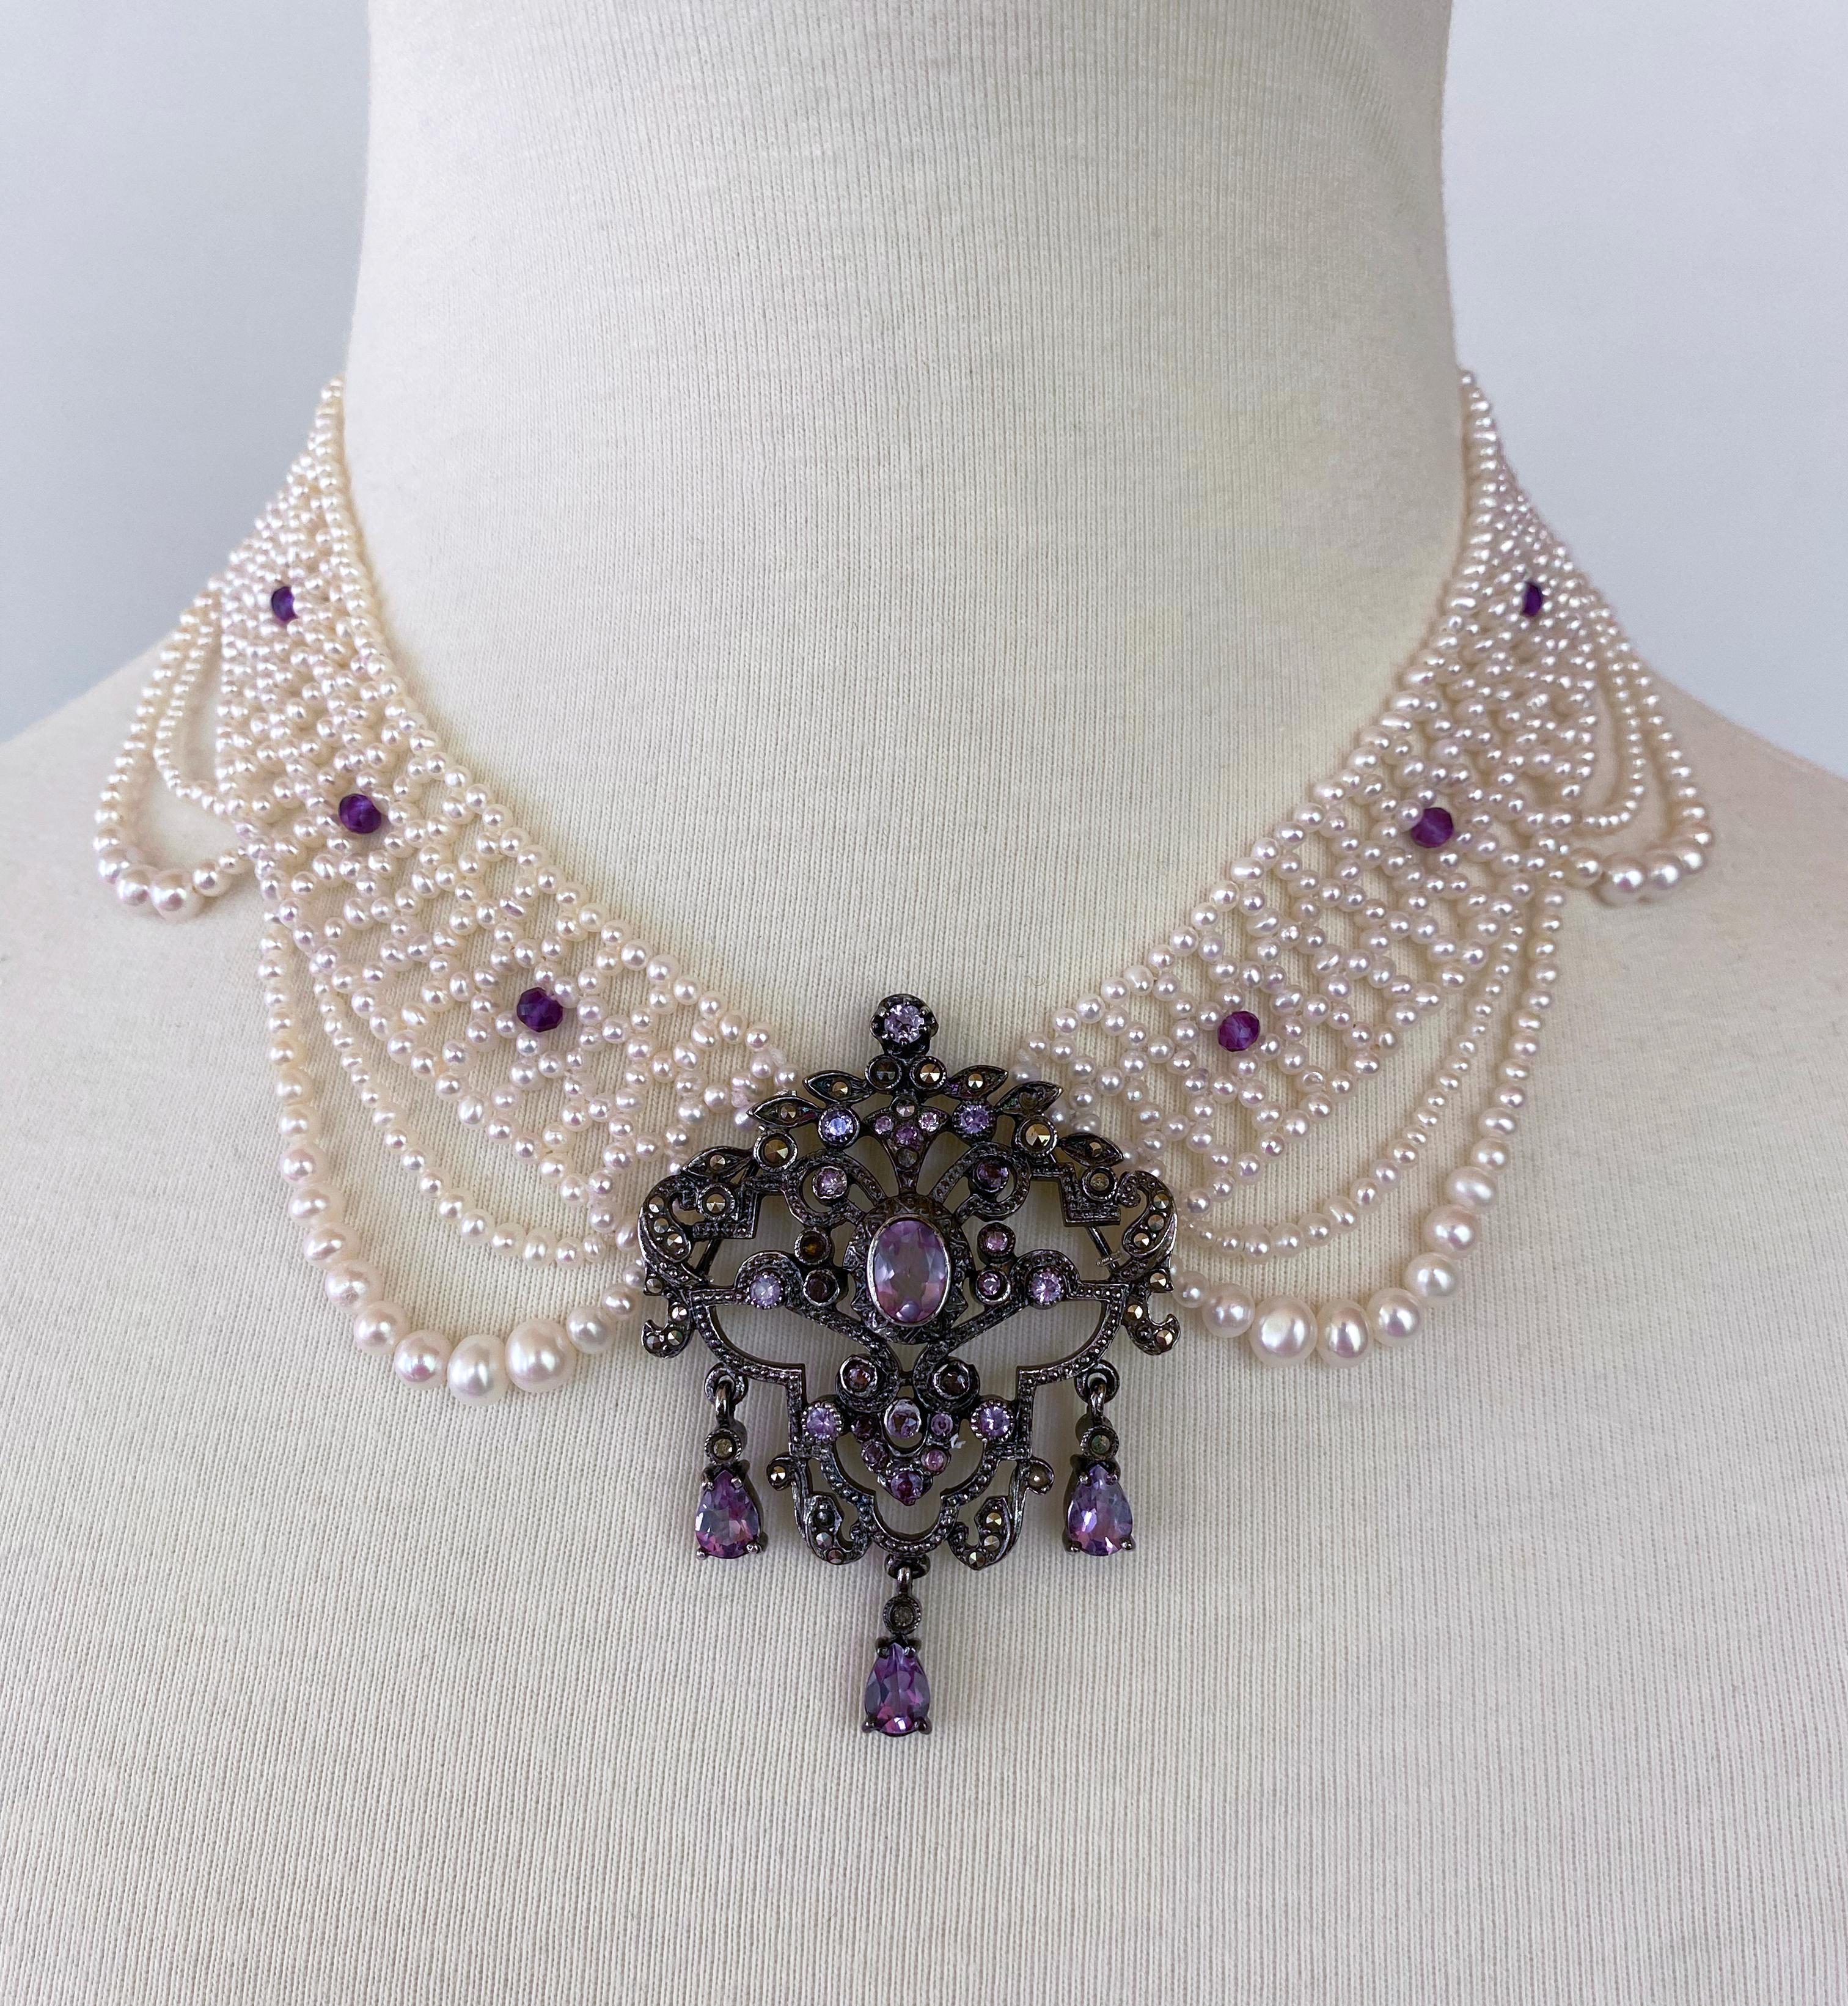 Gorgeous One of One Necklace by Marina J. This piece features a Vintage Victorian Inspired Silver Brooch with Amethyst and Crystal set within, reimagined into a  stunning Centerpiece. The Centerpiece gives amazing shine and is attached to a Cultured